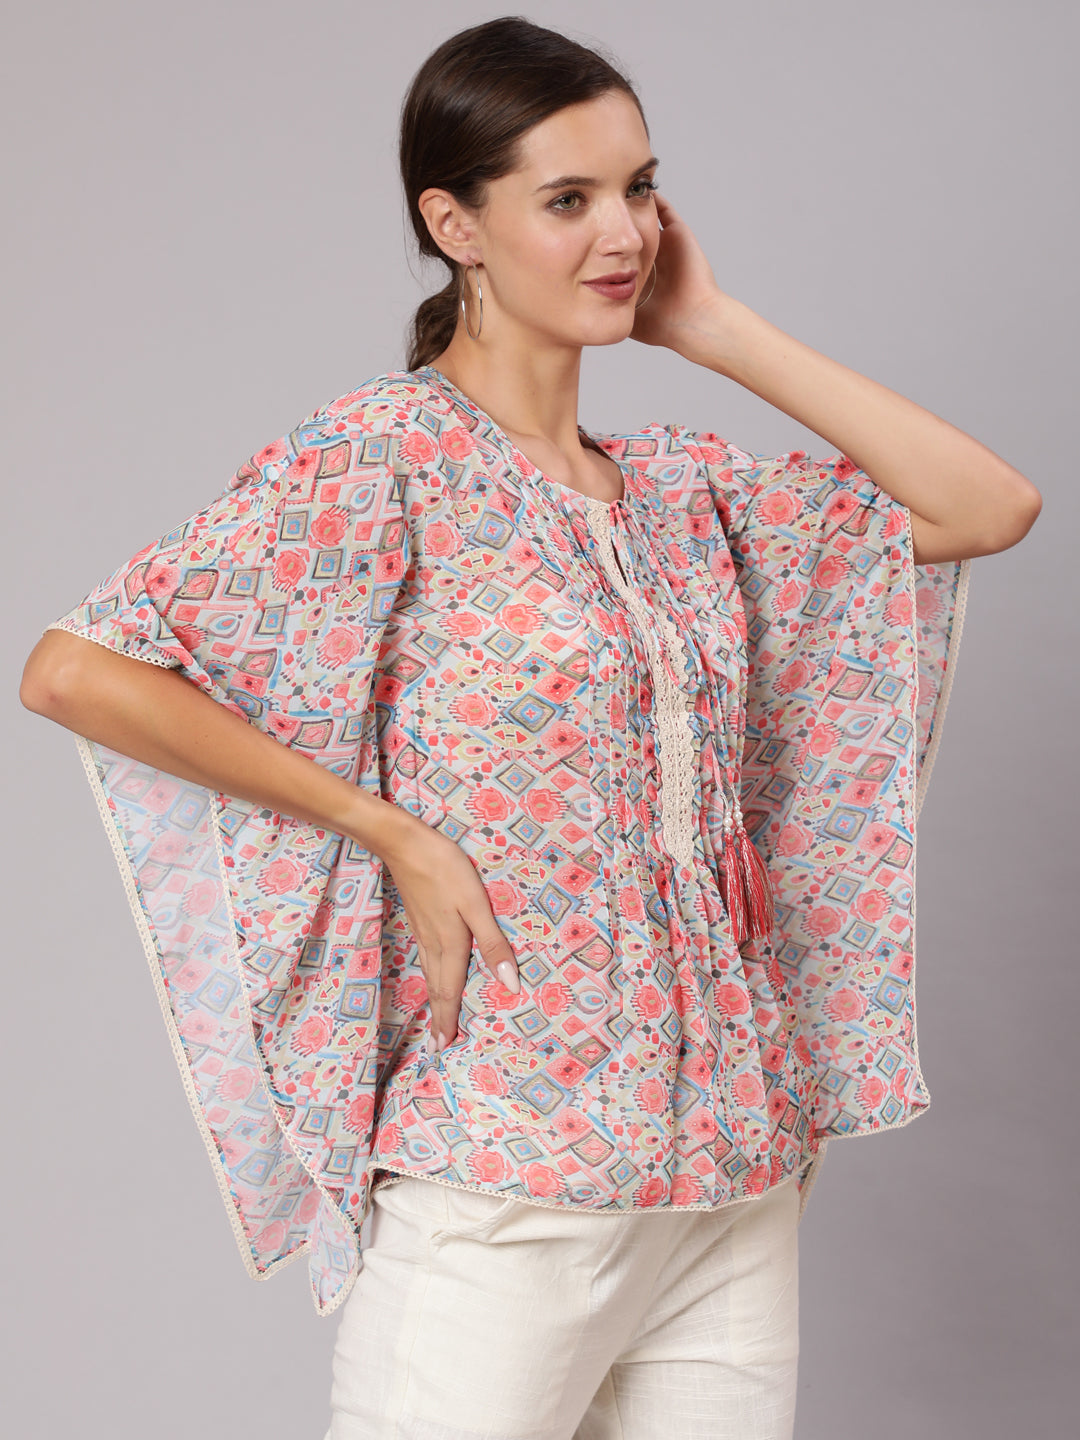 A Peach Geometric Printed Georgette Kaftan Top With Pintucks And Lace Details At The Yoke With Off- White Cotton Pants